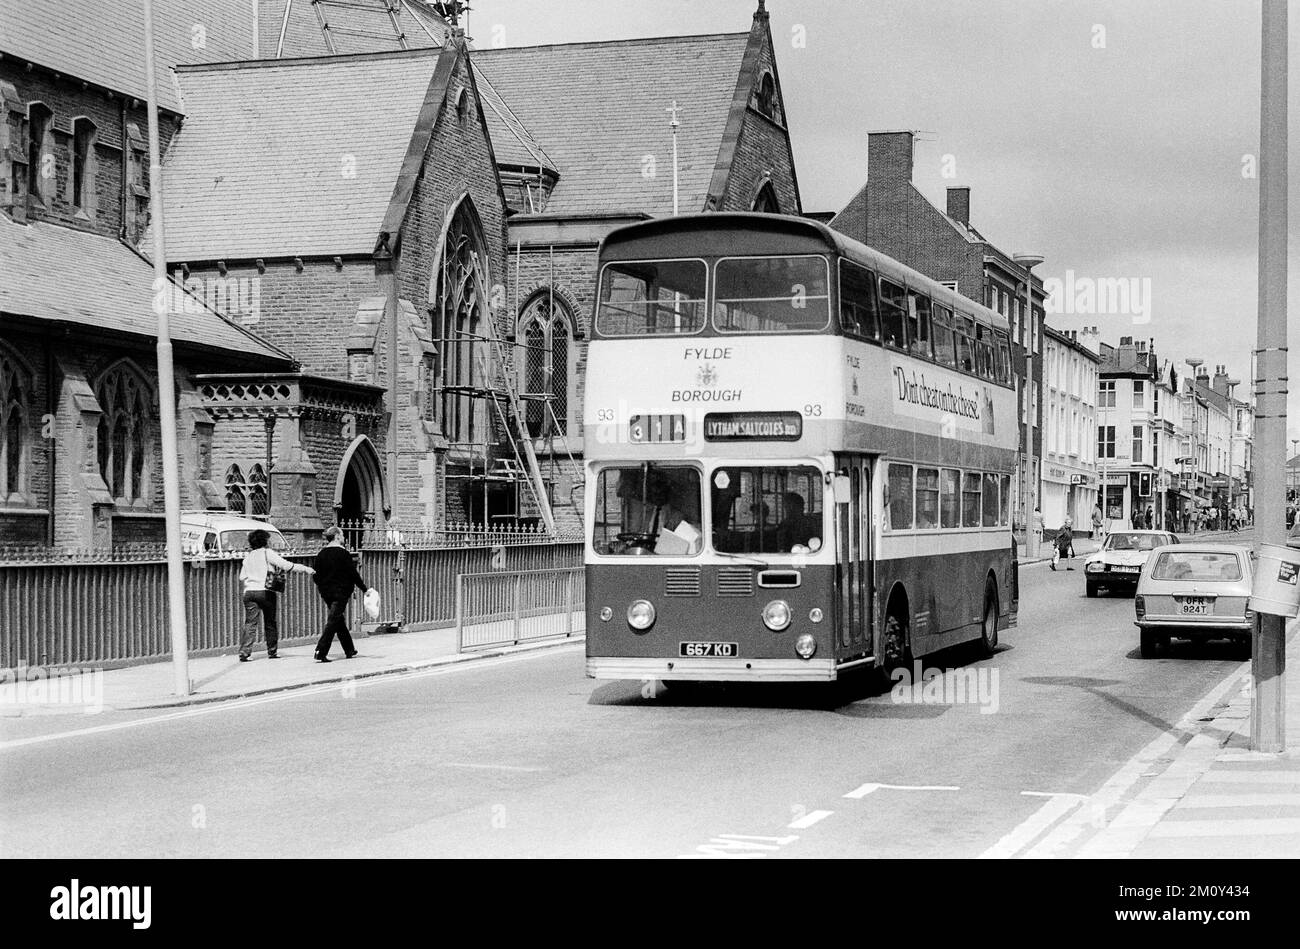 Black & white archive image of Talbot Road, Blackpool,  Lancashire.  Fylde Borough double-decker bus passing the Sacred Heart Catholic church.  Believed to be late-1970s or early-1980s. Stock Photo